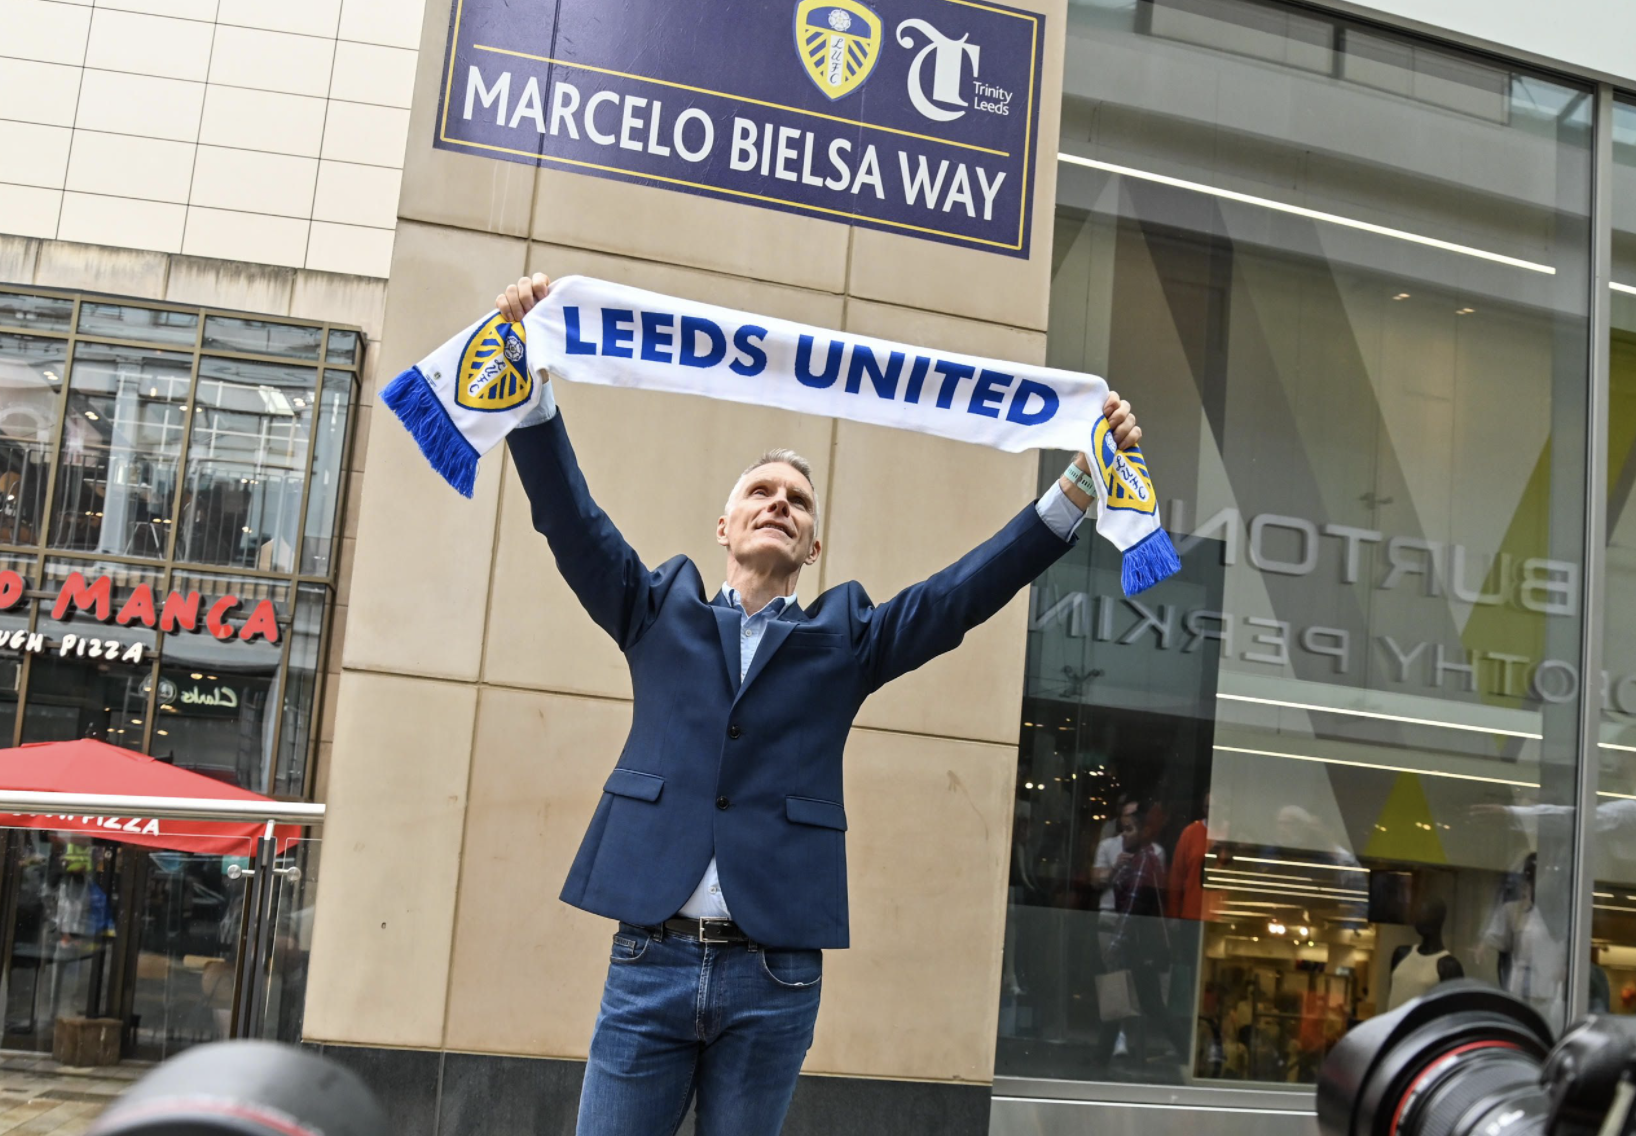 ‘Marcelo Bielsa Way’ street to remain in the city to ‘honour’ former manager